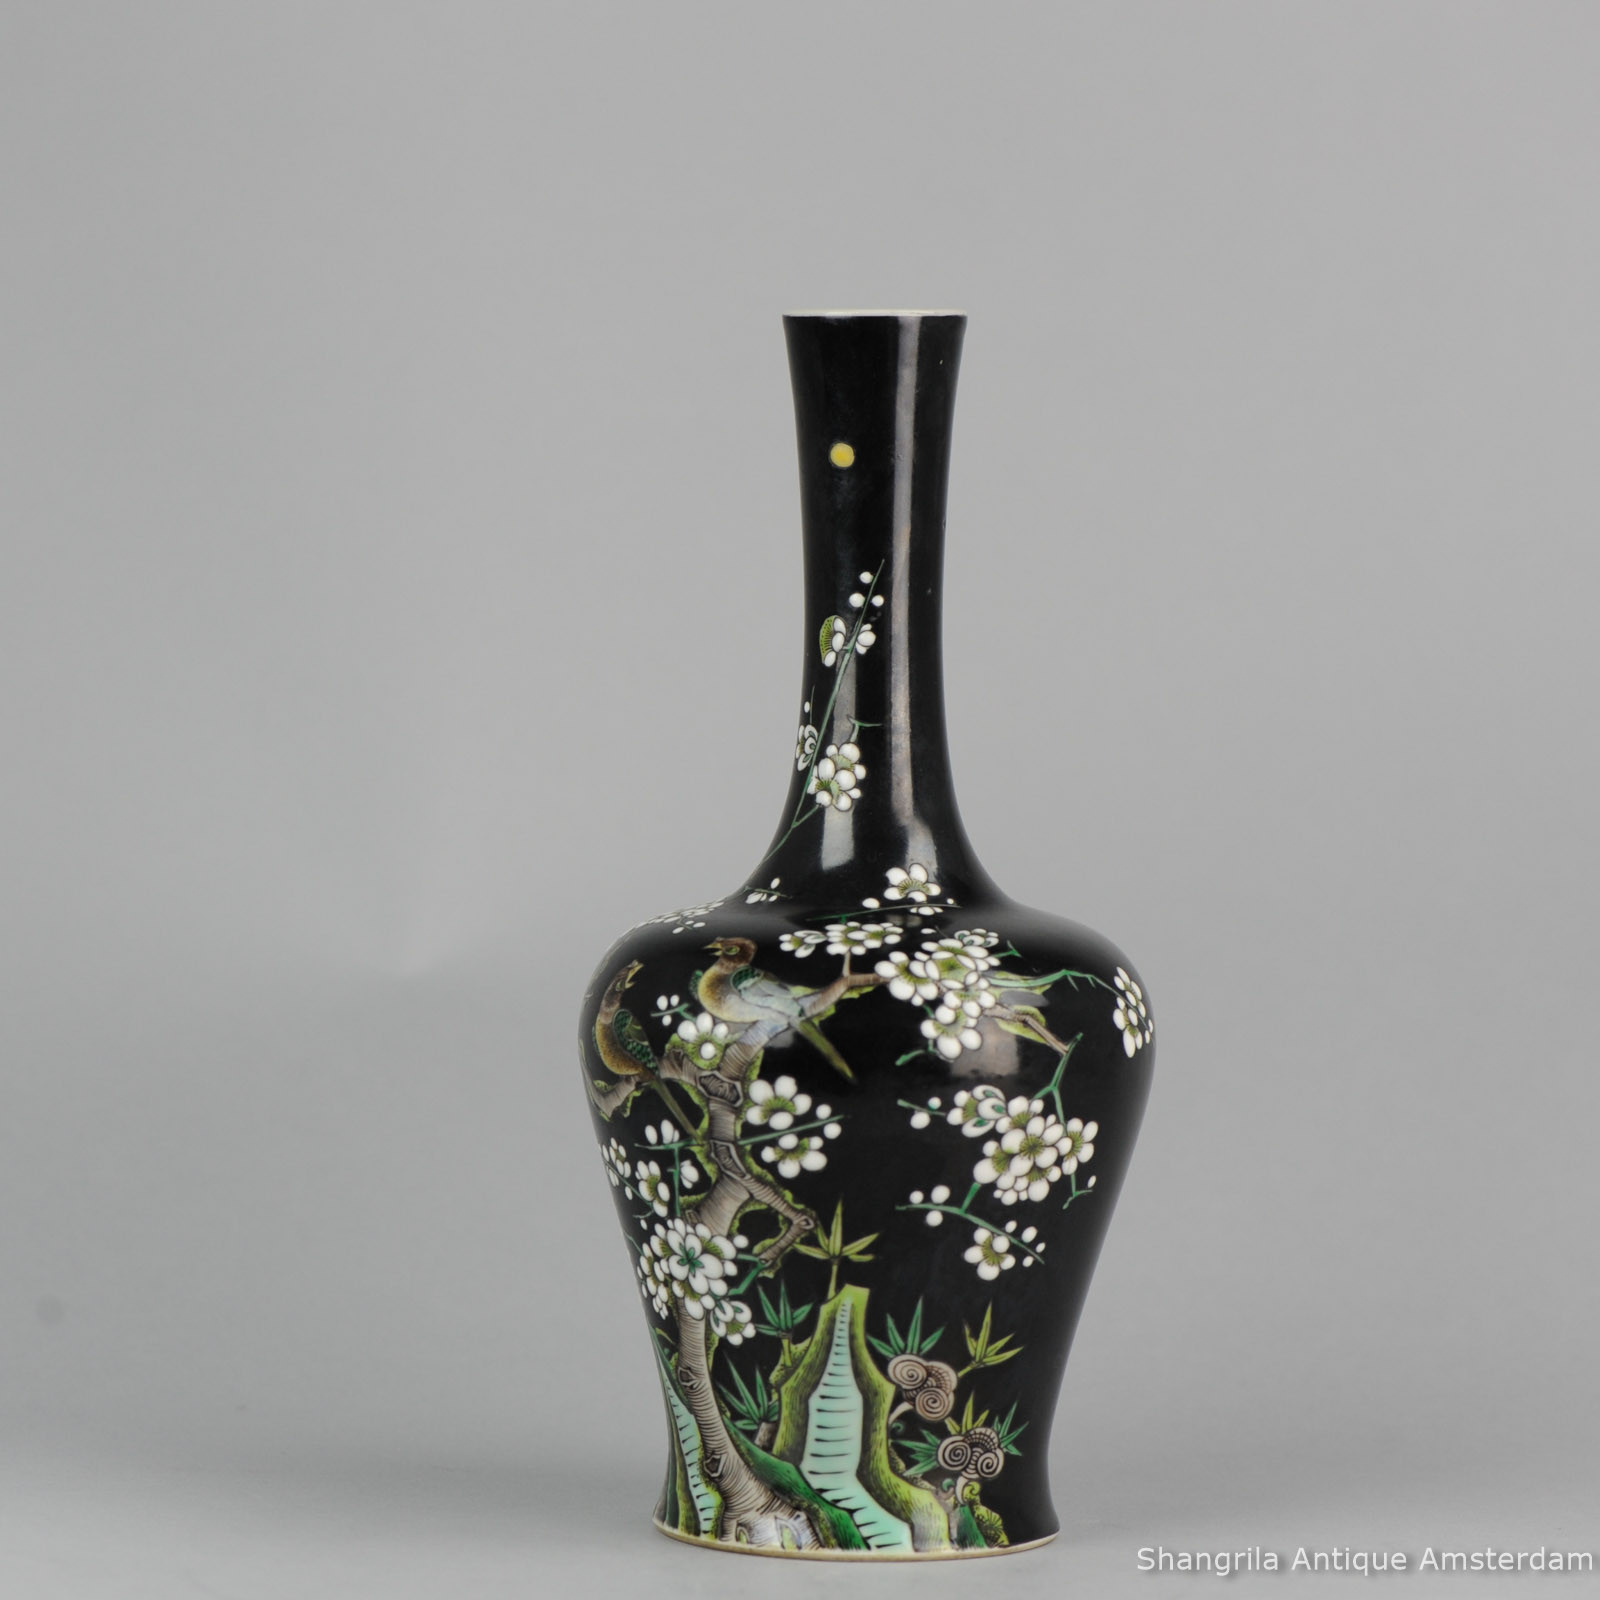 26 Awesome Ming Dynasty Vase for Sale 2024 free download ming dynasty vase for sale of shangrila antique regarding sold